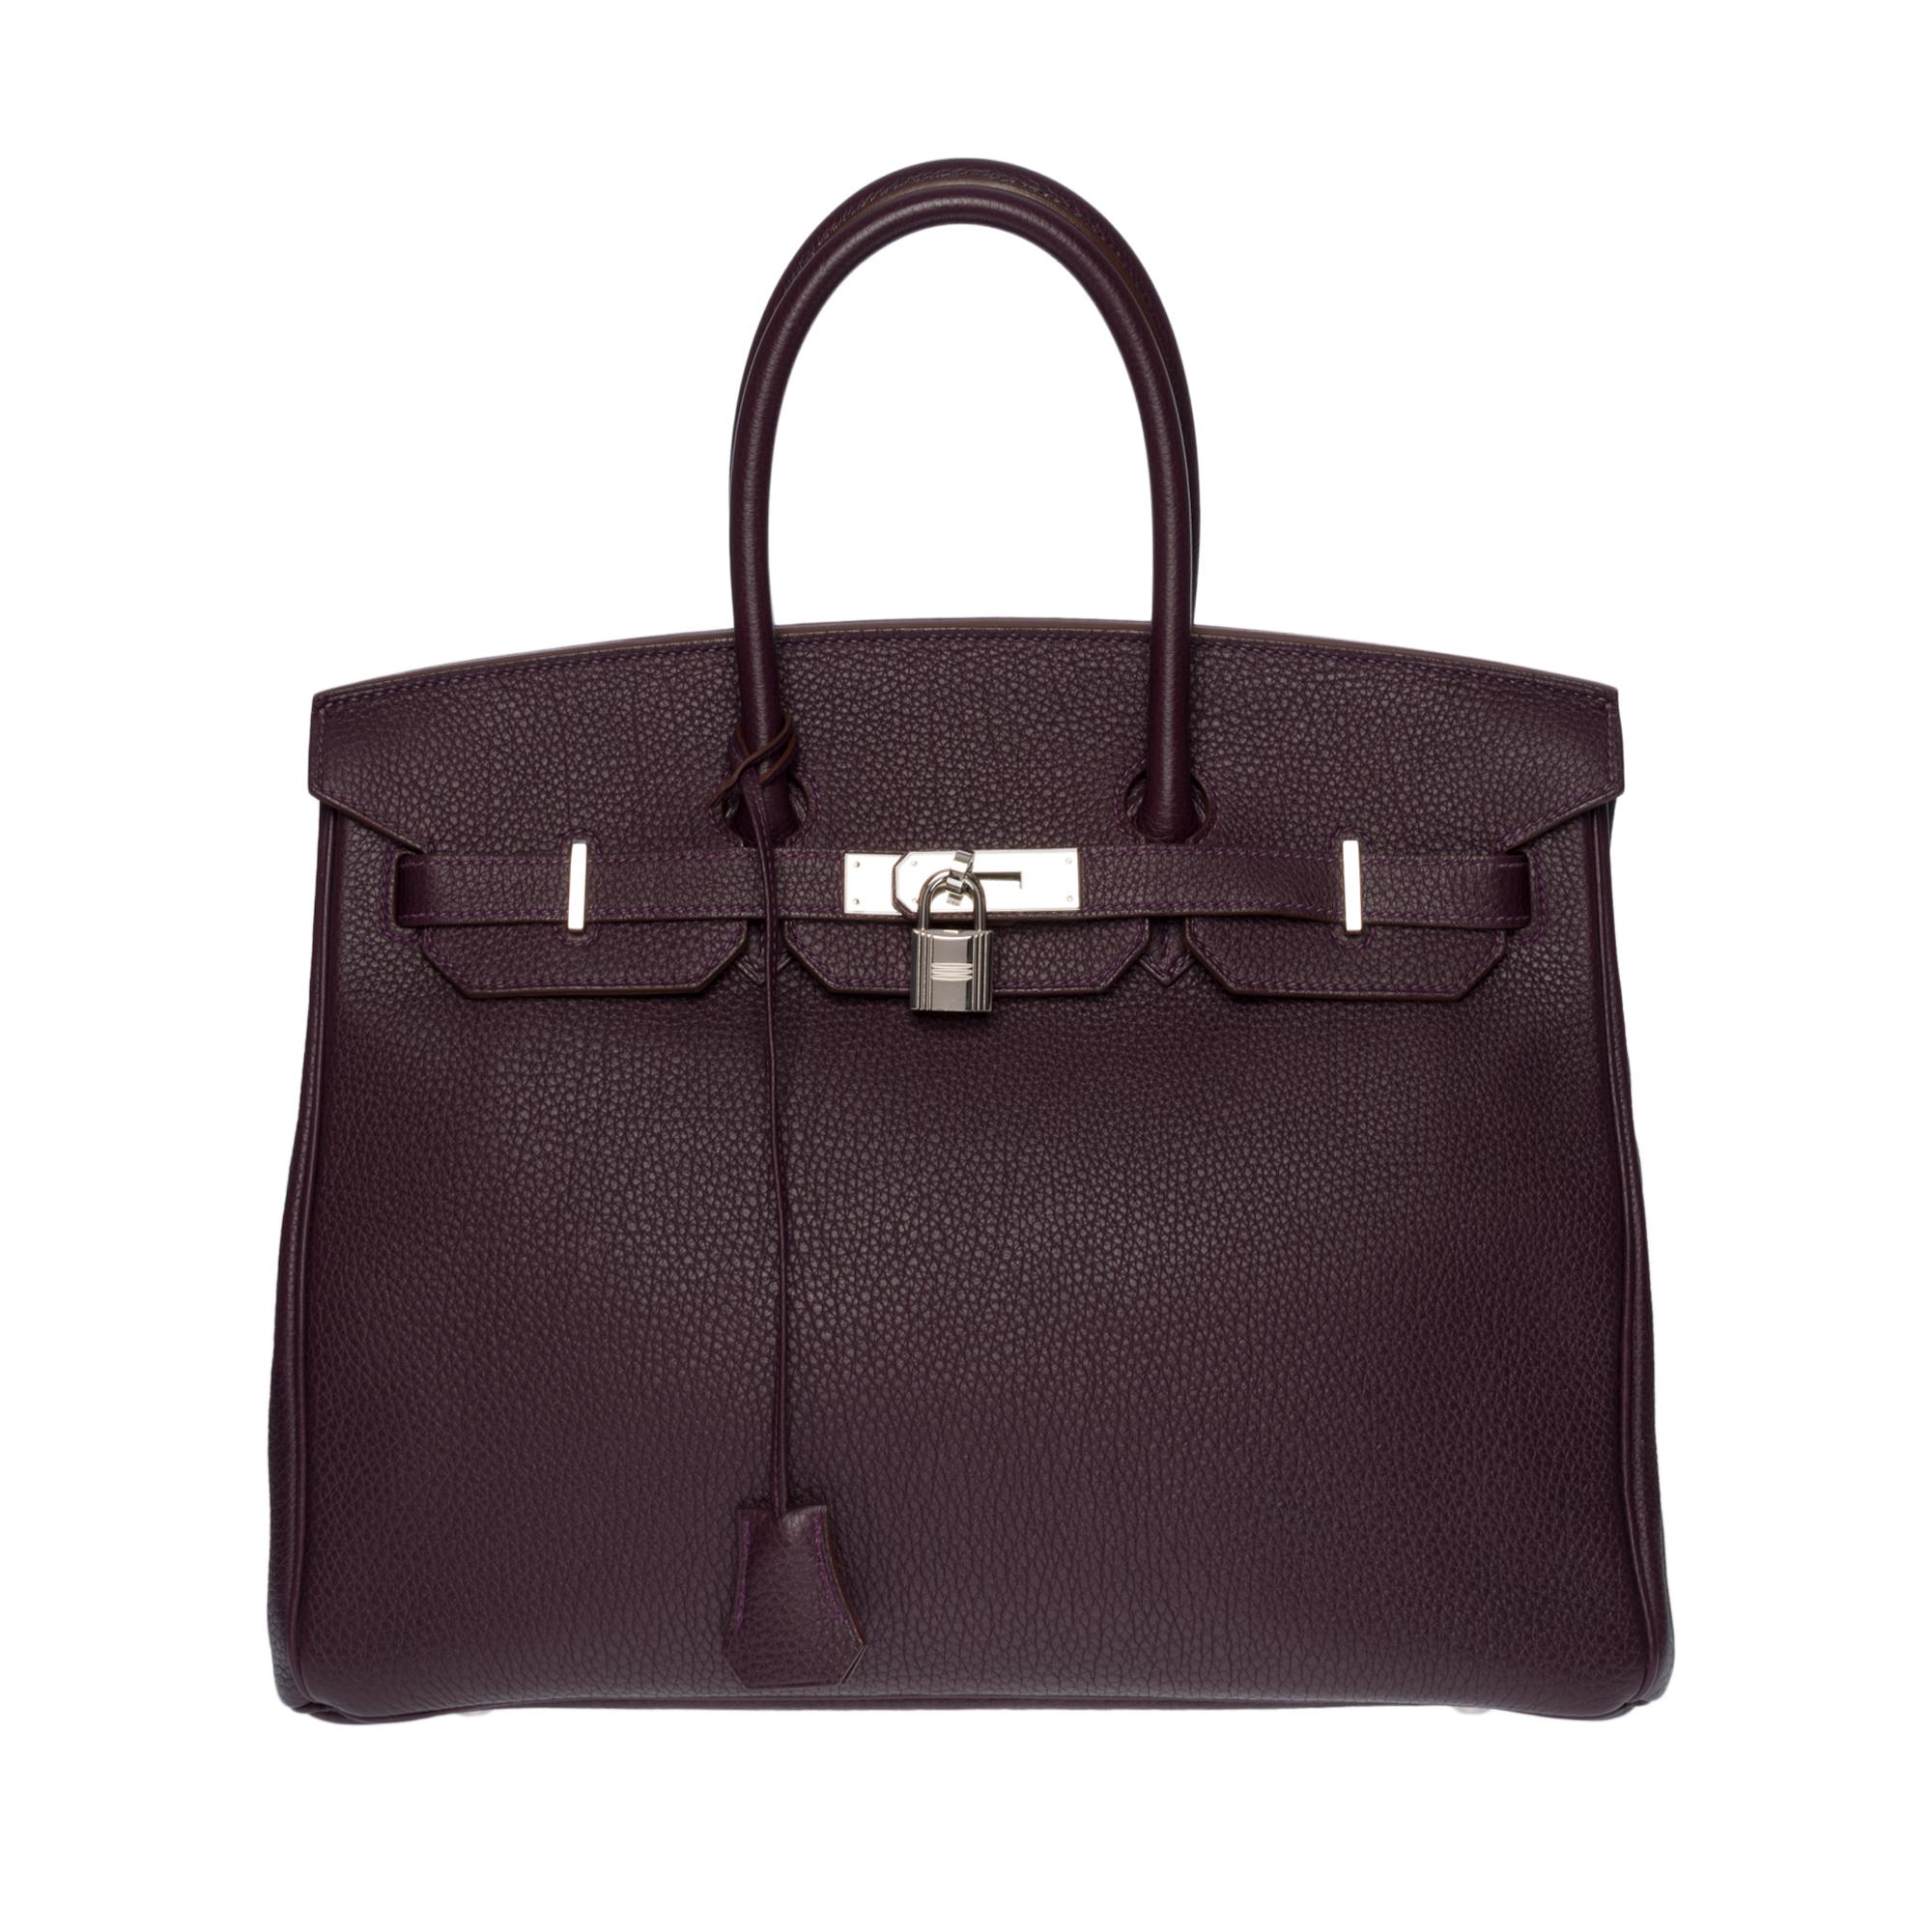 Superb handbag Hermes Birkin 35 cm in Togo Raisin leather, palladium silver metal hardware, double handle in purple leather for a hand-carried

Flap closure
Inner lining in purple leather, one zippered pocket, one patch pocket
Signature: 